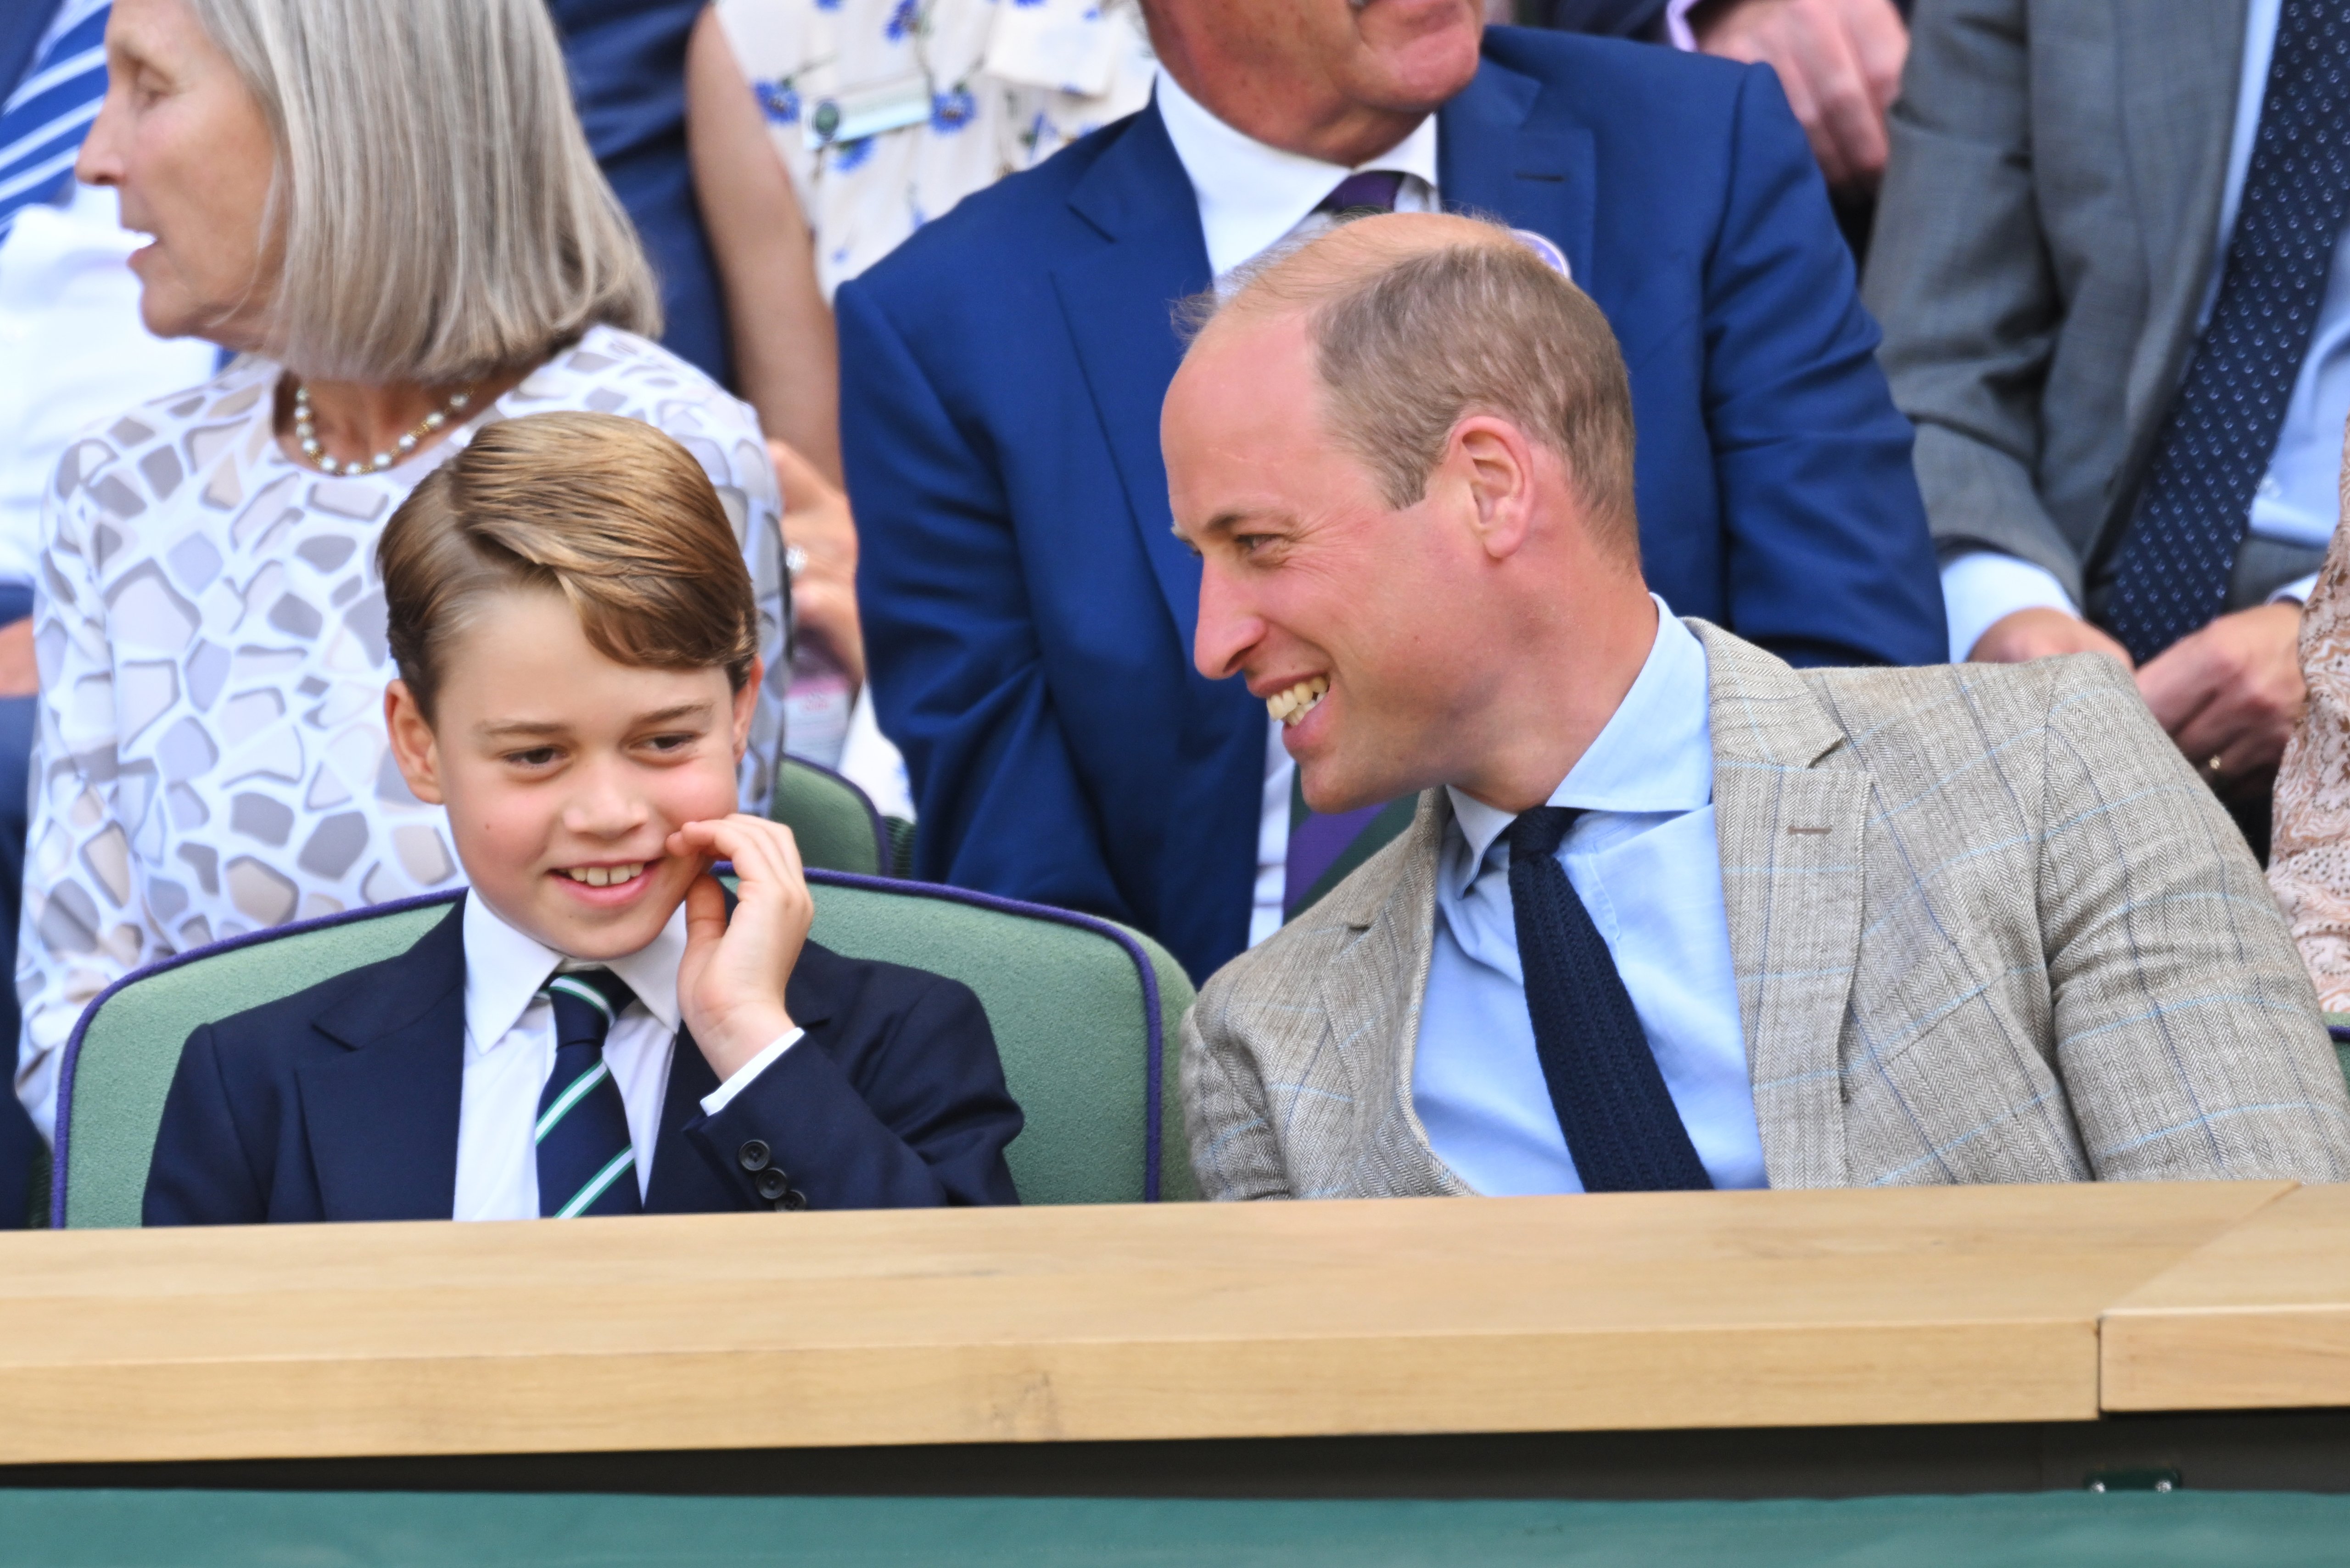 Prince George photographed with his father Prince William during The Wimbledon Men's Singles final at the All England Lawn Tennis and Croquet Club on July 10, 2022 in London, England.︳Source: Getty Images